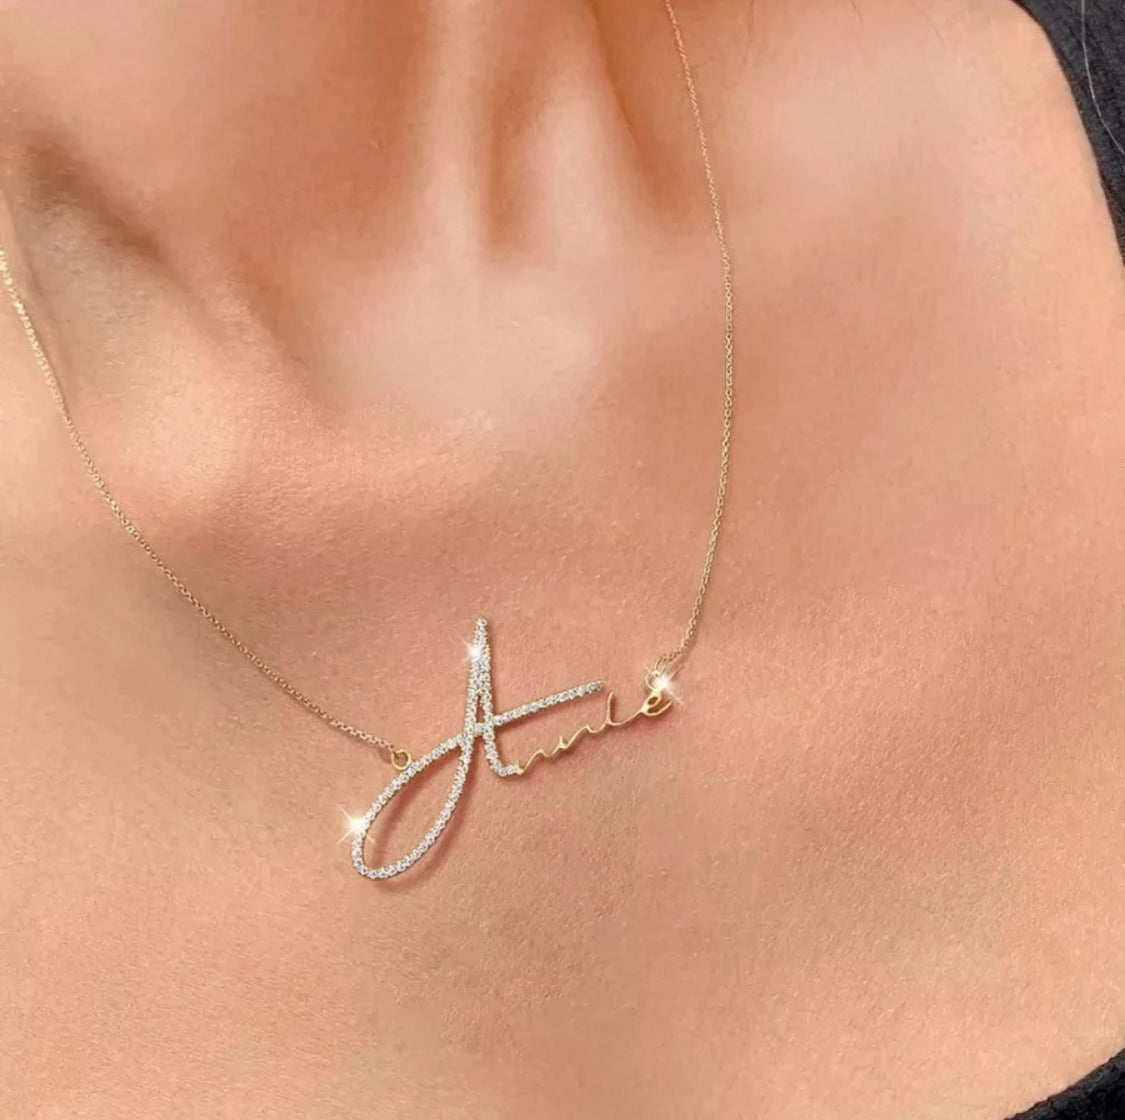 The Dainty Signature Necklace